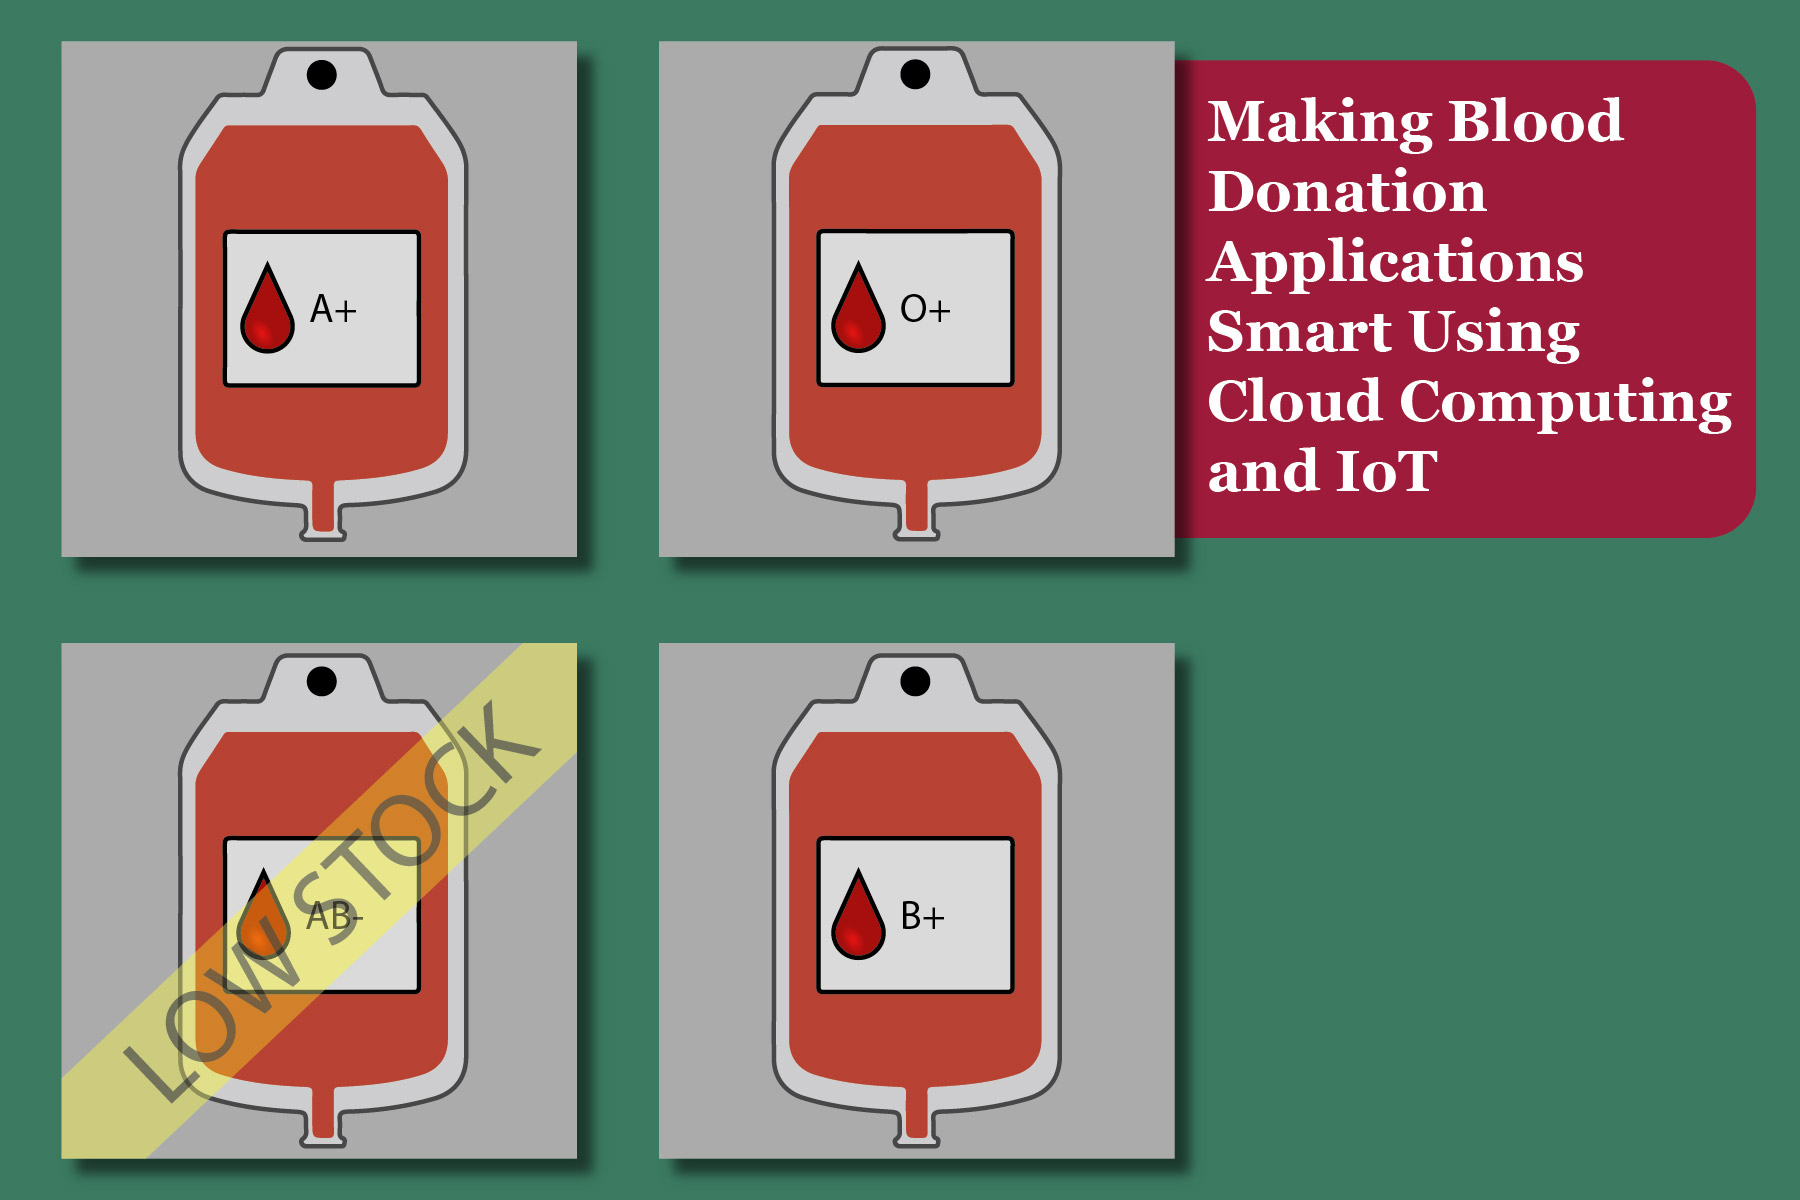 Making Blood Donation Applications Smart Using Cloud Computing and IoT